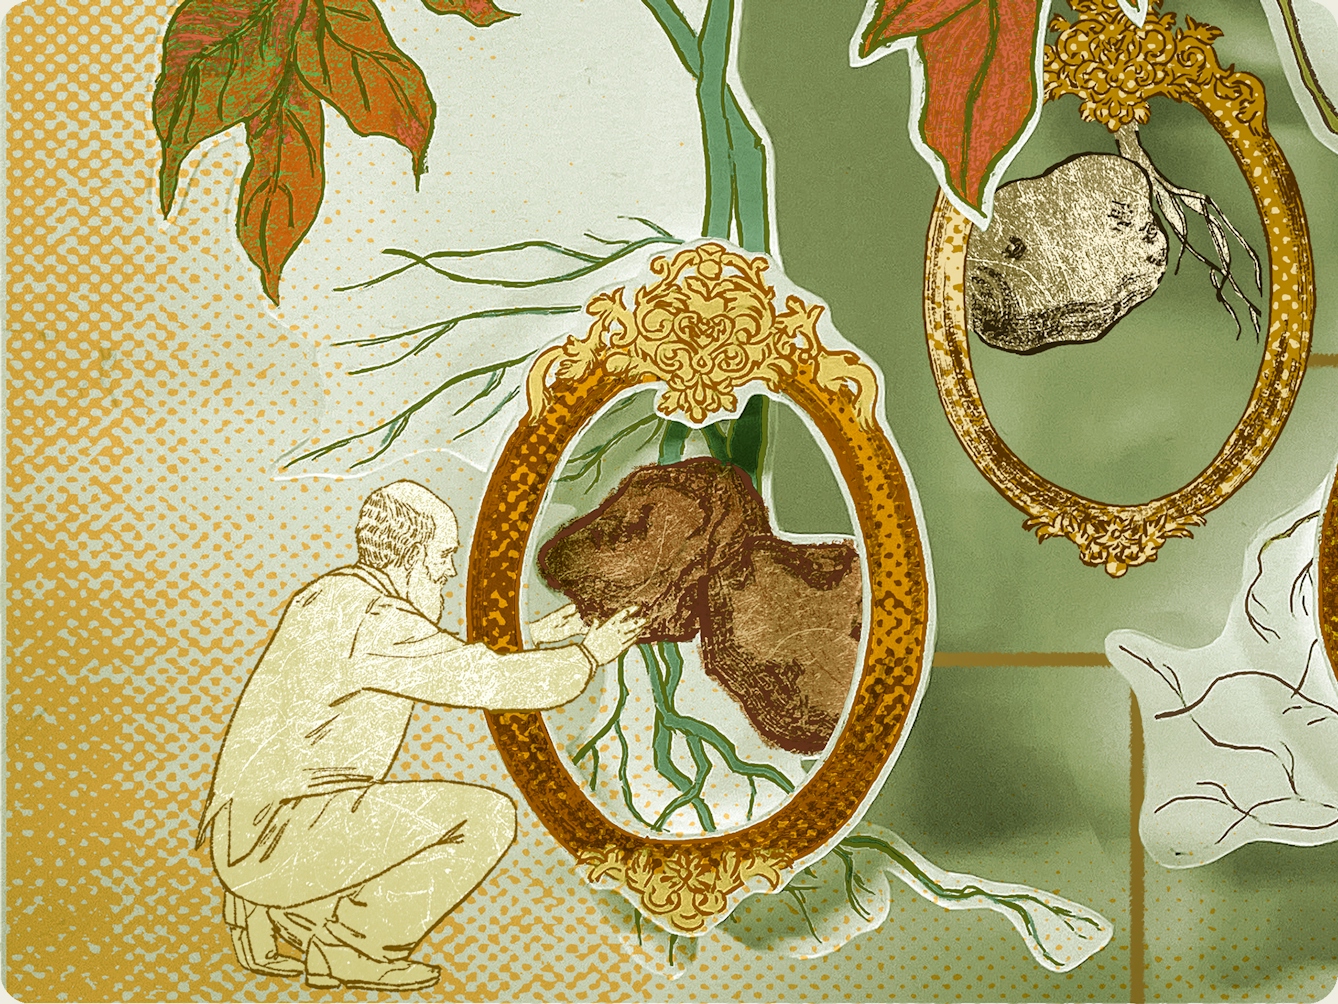 Photograph of a papercut 3D artwork. Detail from a larger artwork which shows a family tree like diagram of six potatoes. This detail pictures an illustration of Charles Darwin crouching beside a potato, touching it with both his hands.